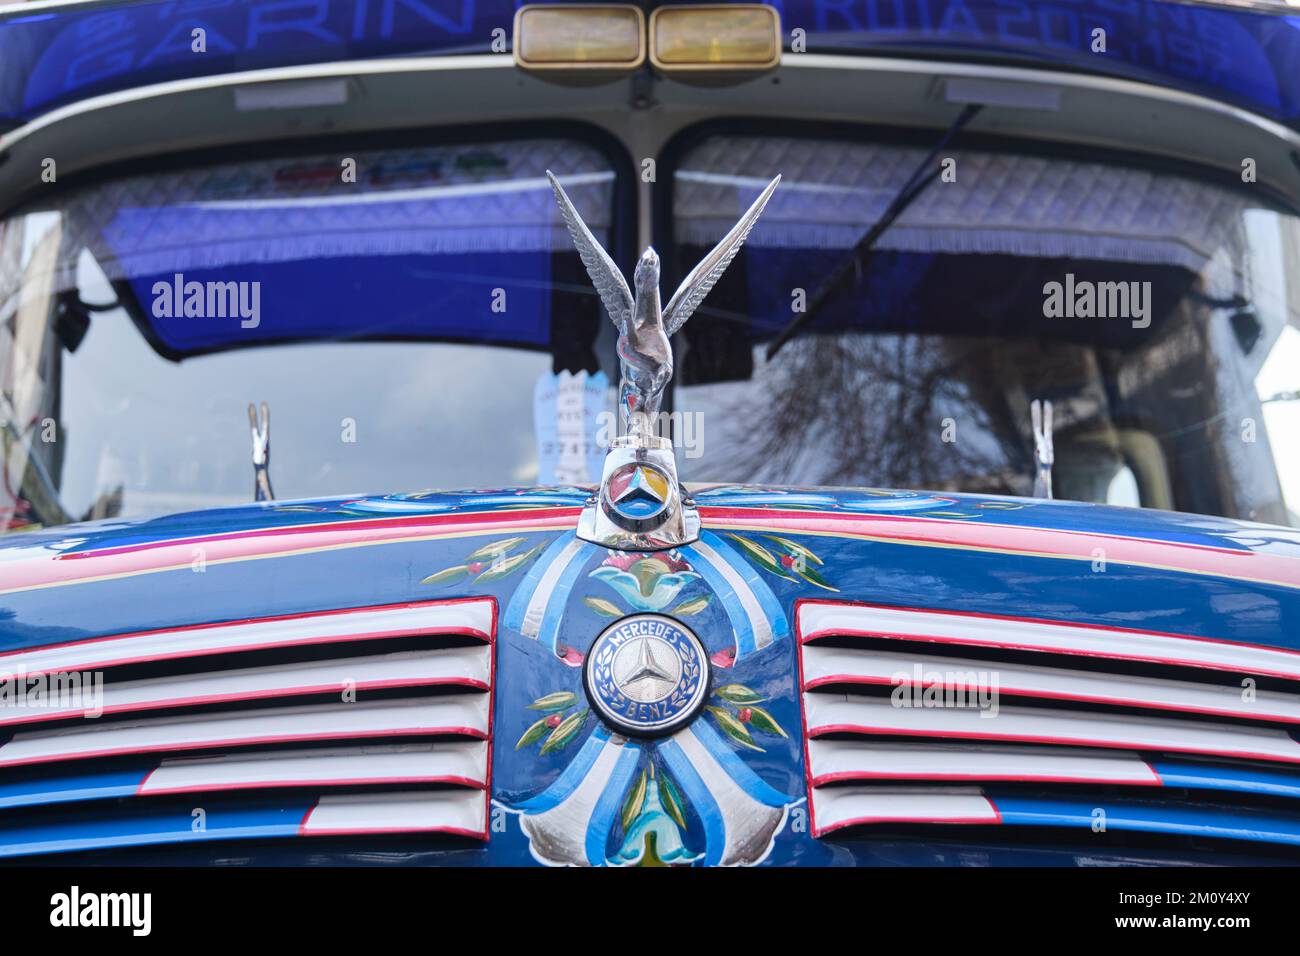 Buenos Aires, Argentina, June 20, 2022: frontal close up view of a Mercedes Benz 911, old vintage bus for public transport: Pegasus hood ornament, log Stock Photo